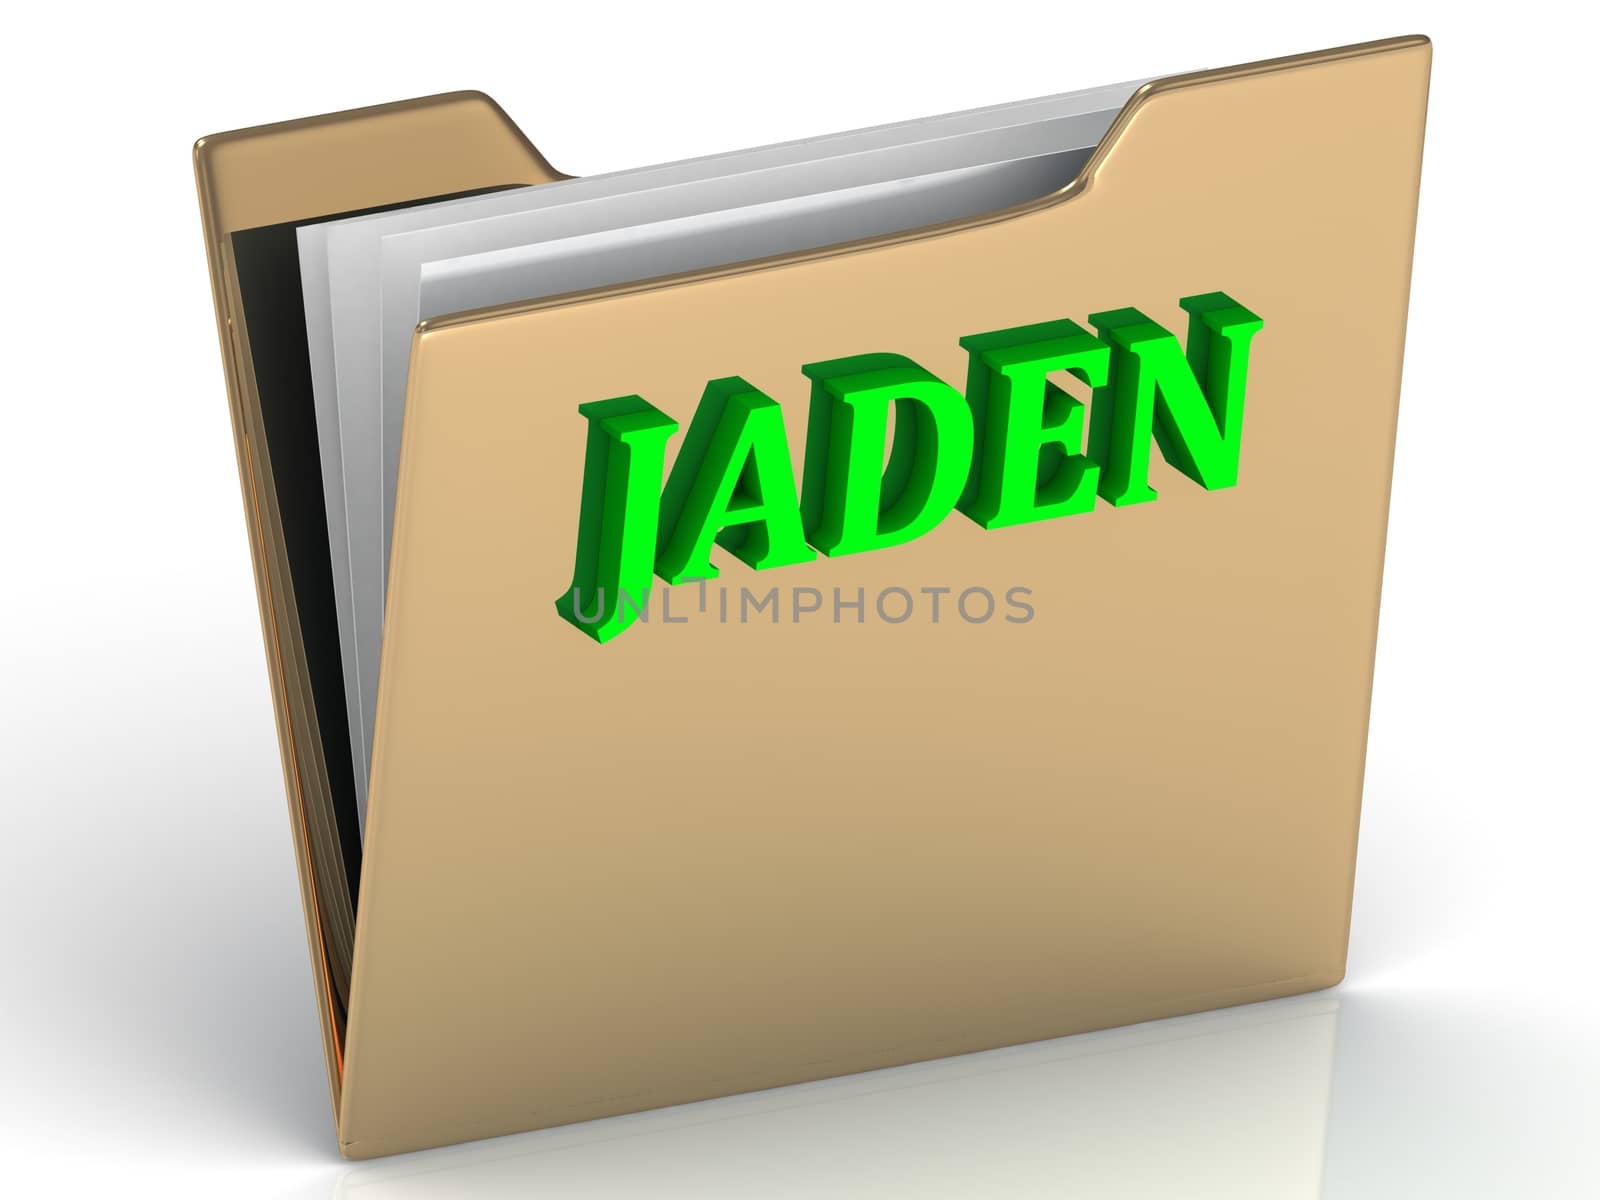 JADEN- Name and Family bright letterswhite backgJADEN- bright green letters on gold paperwork on gold by GreenMost